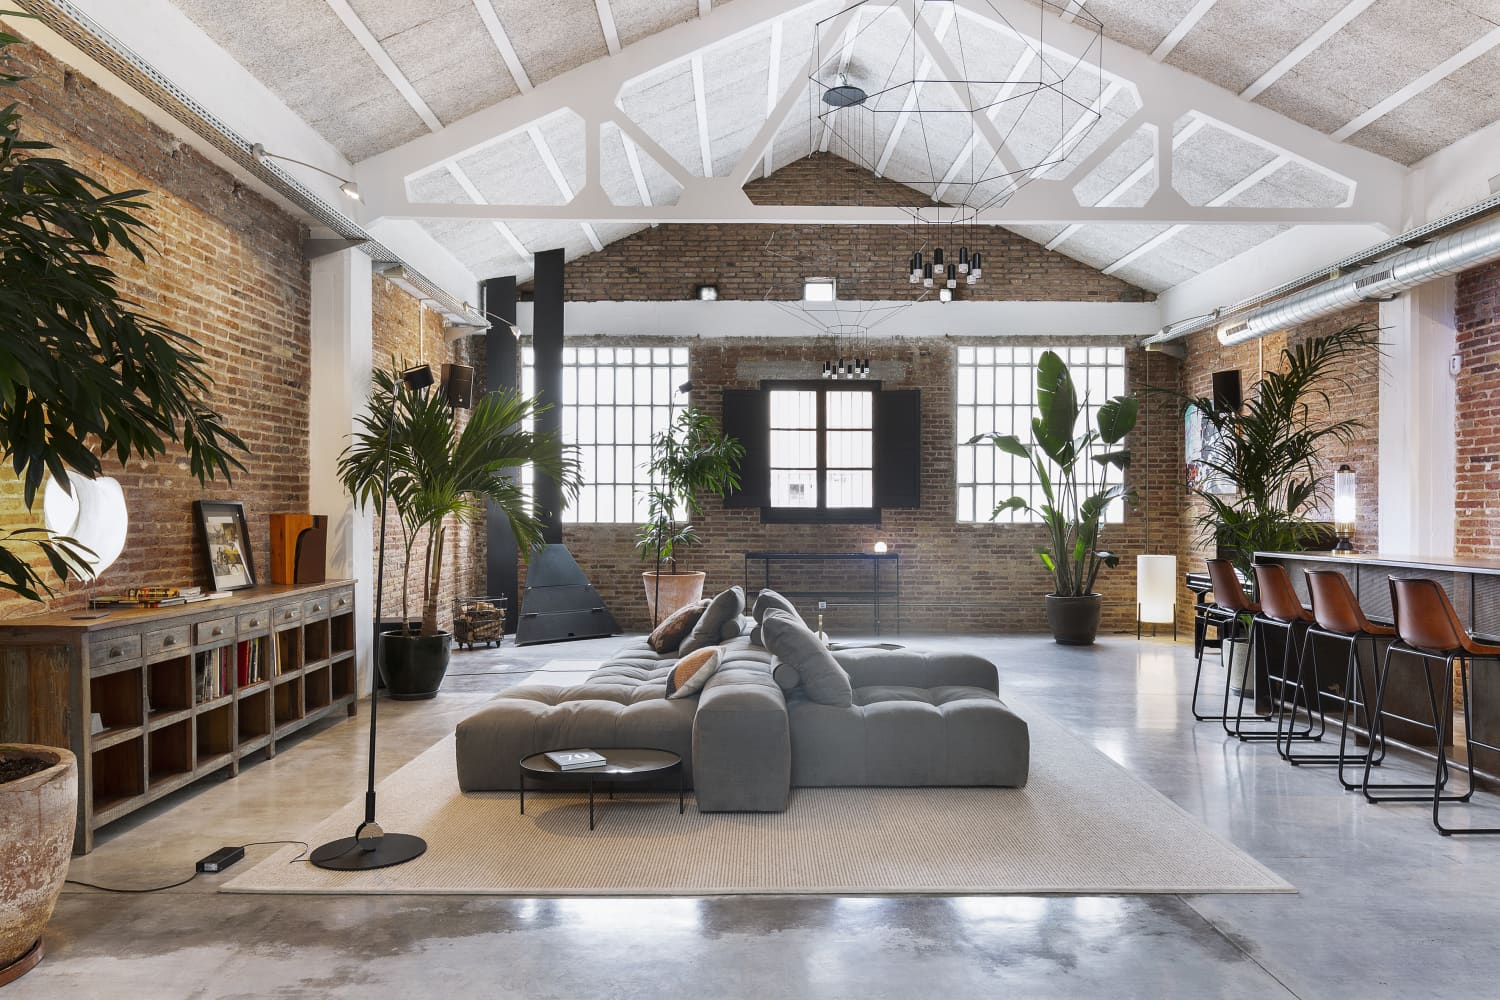 How to Achieve the Industrial Look in Your Home